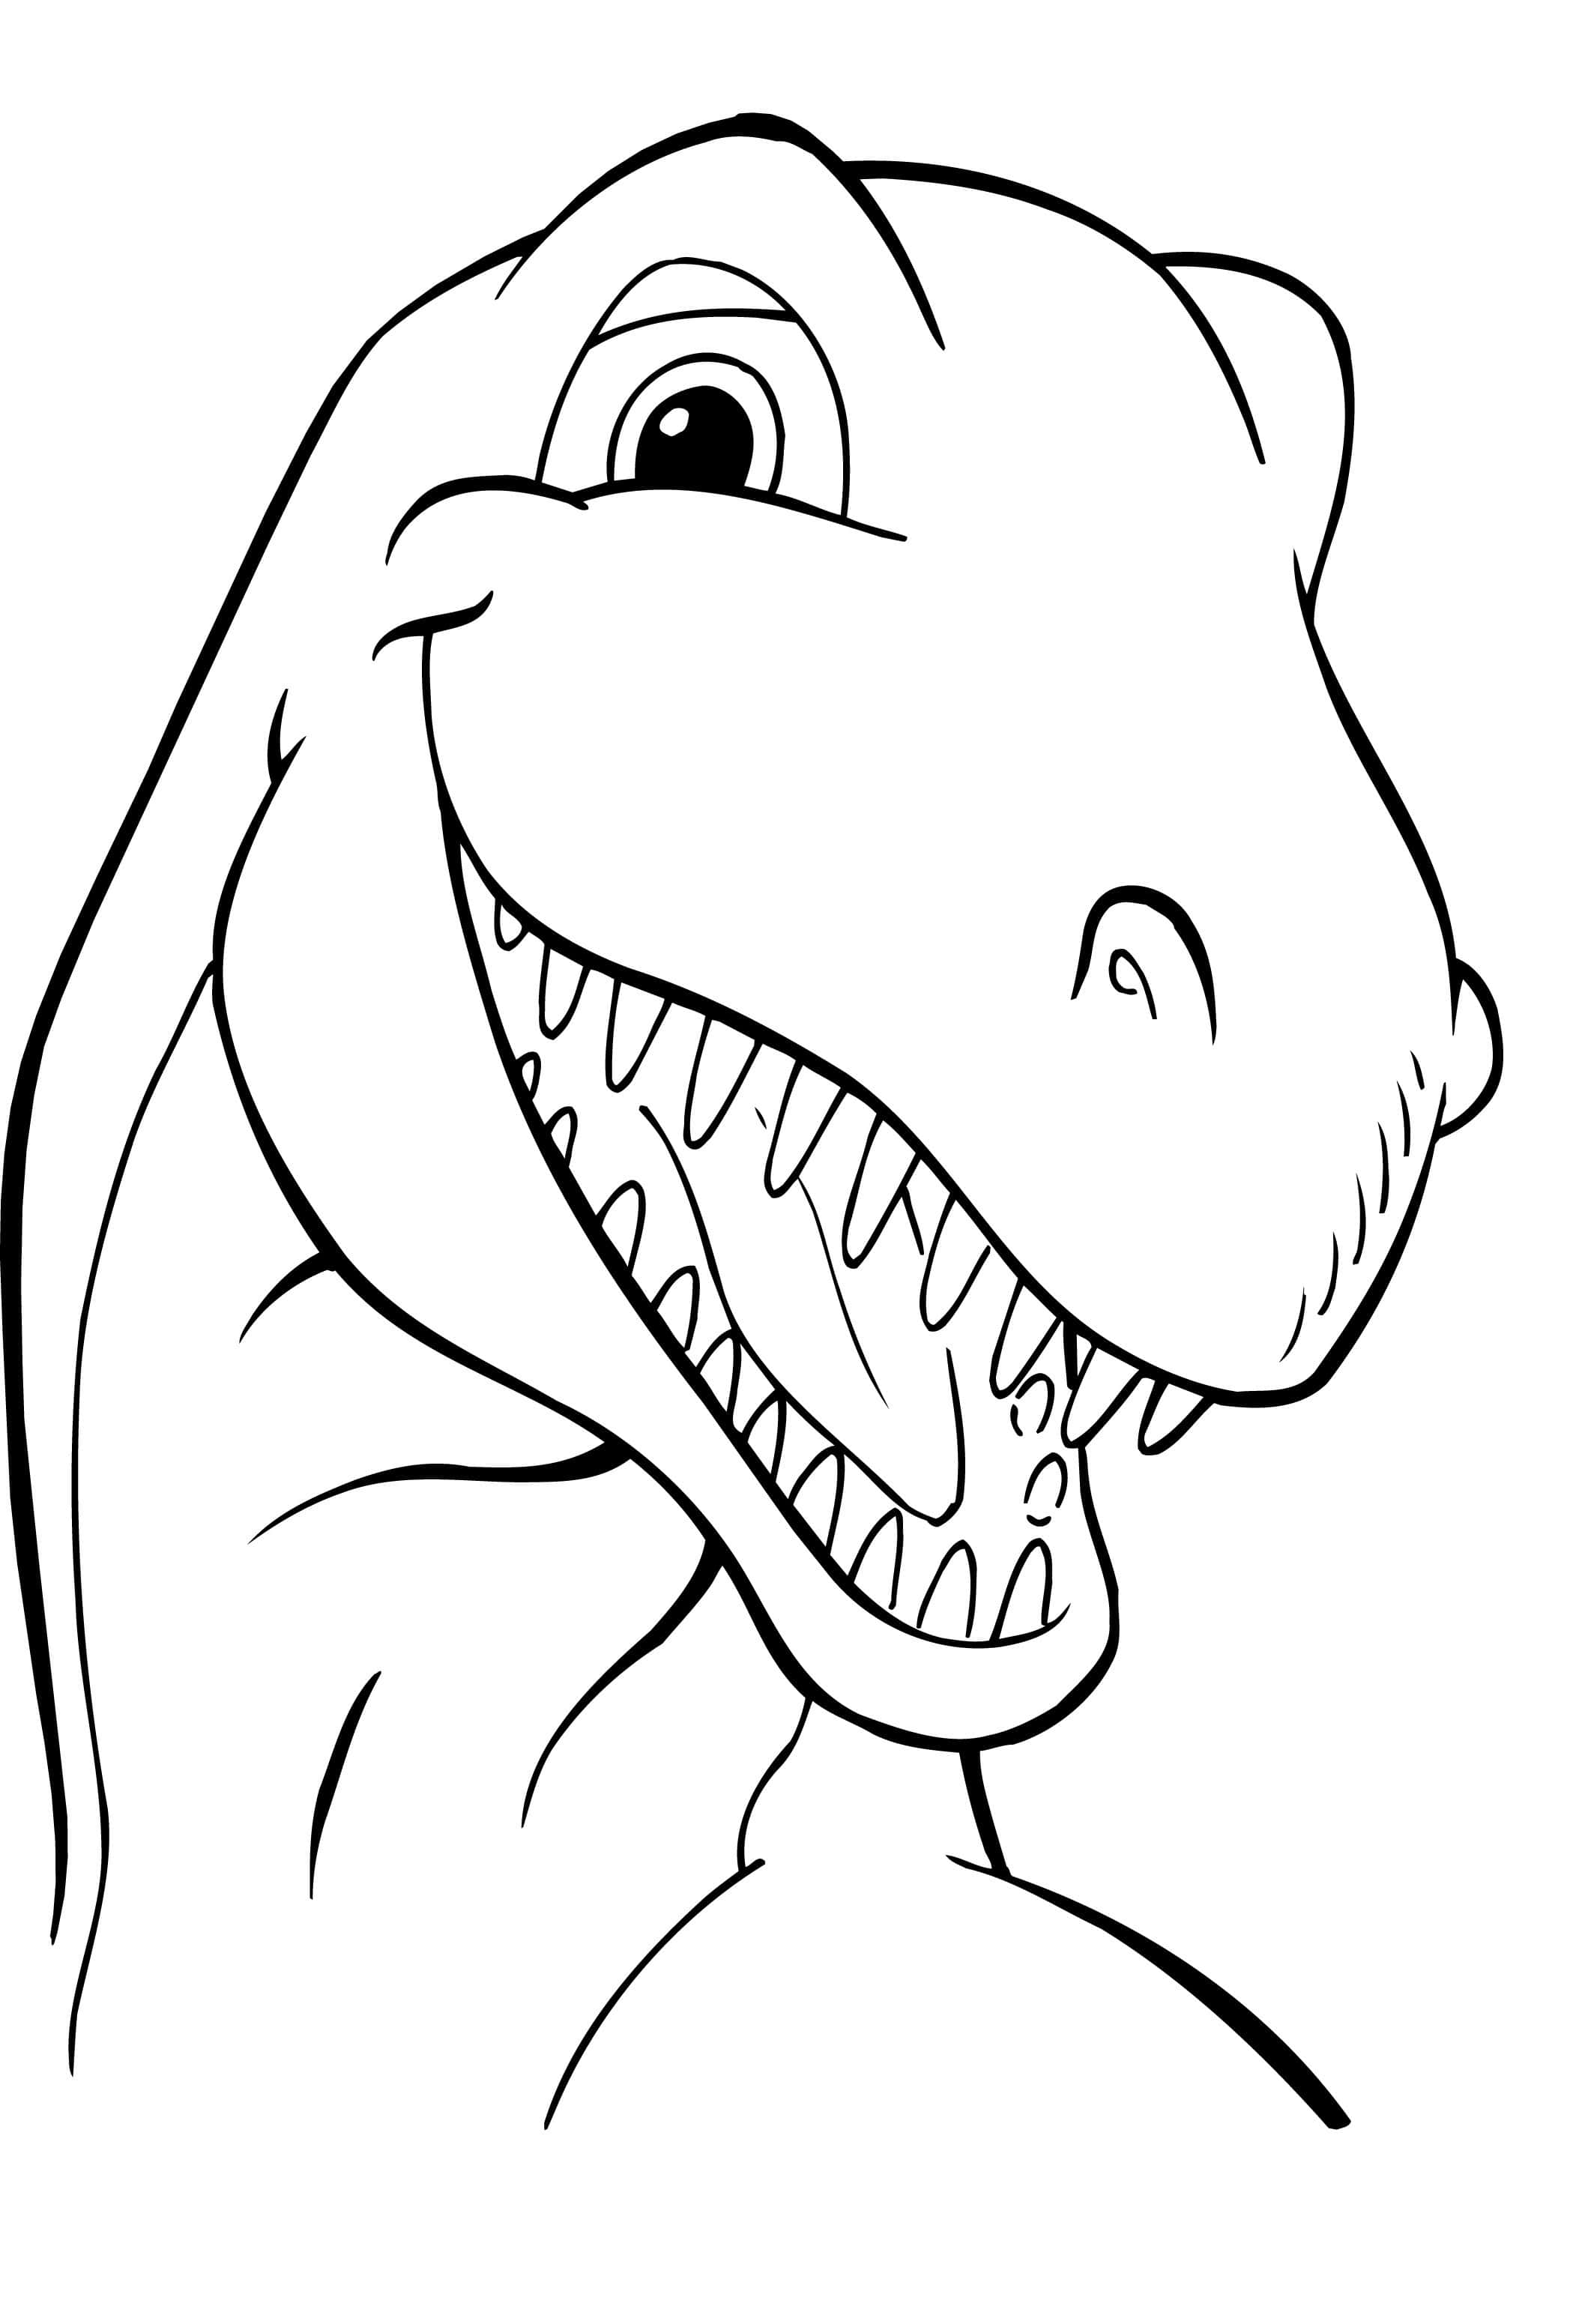 A T - Rex Head Coloring Page